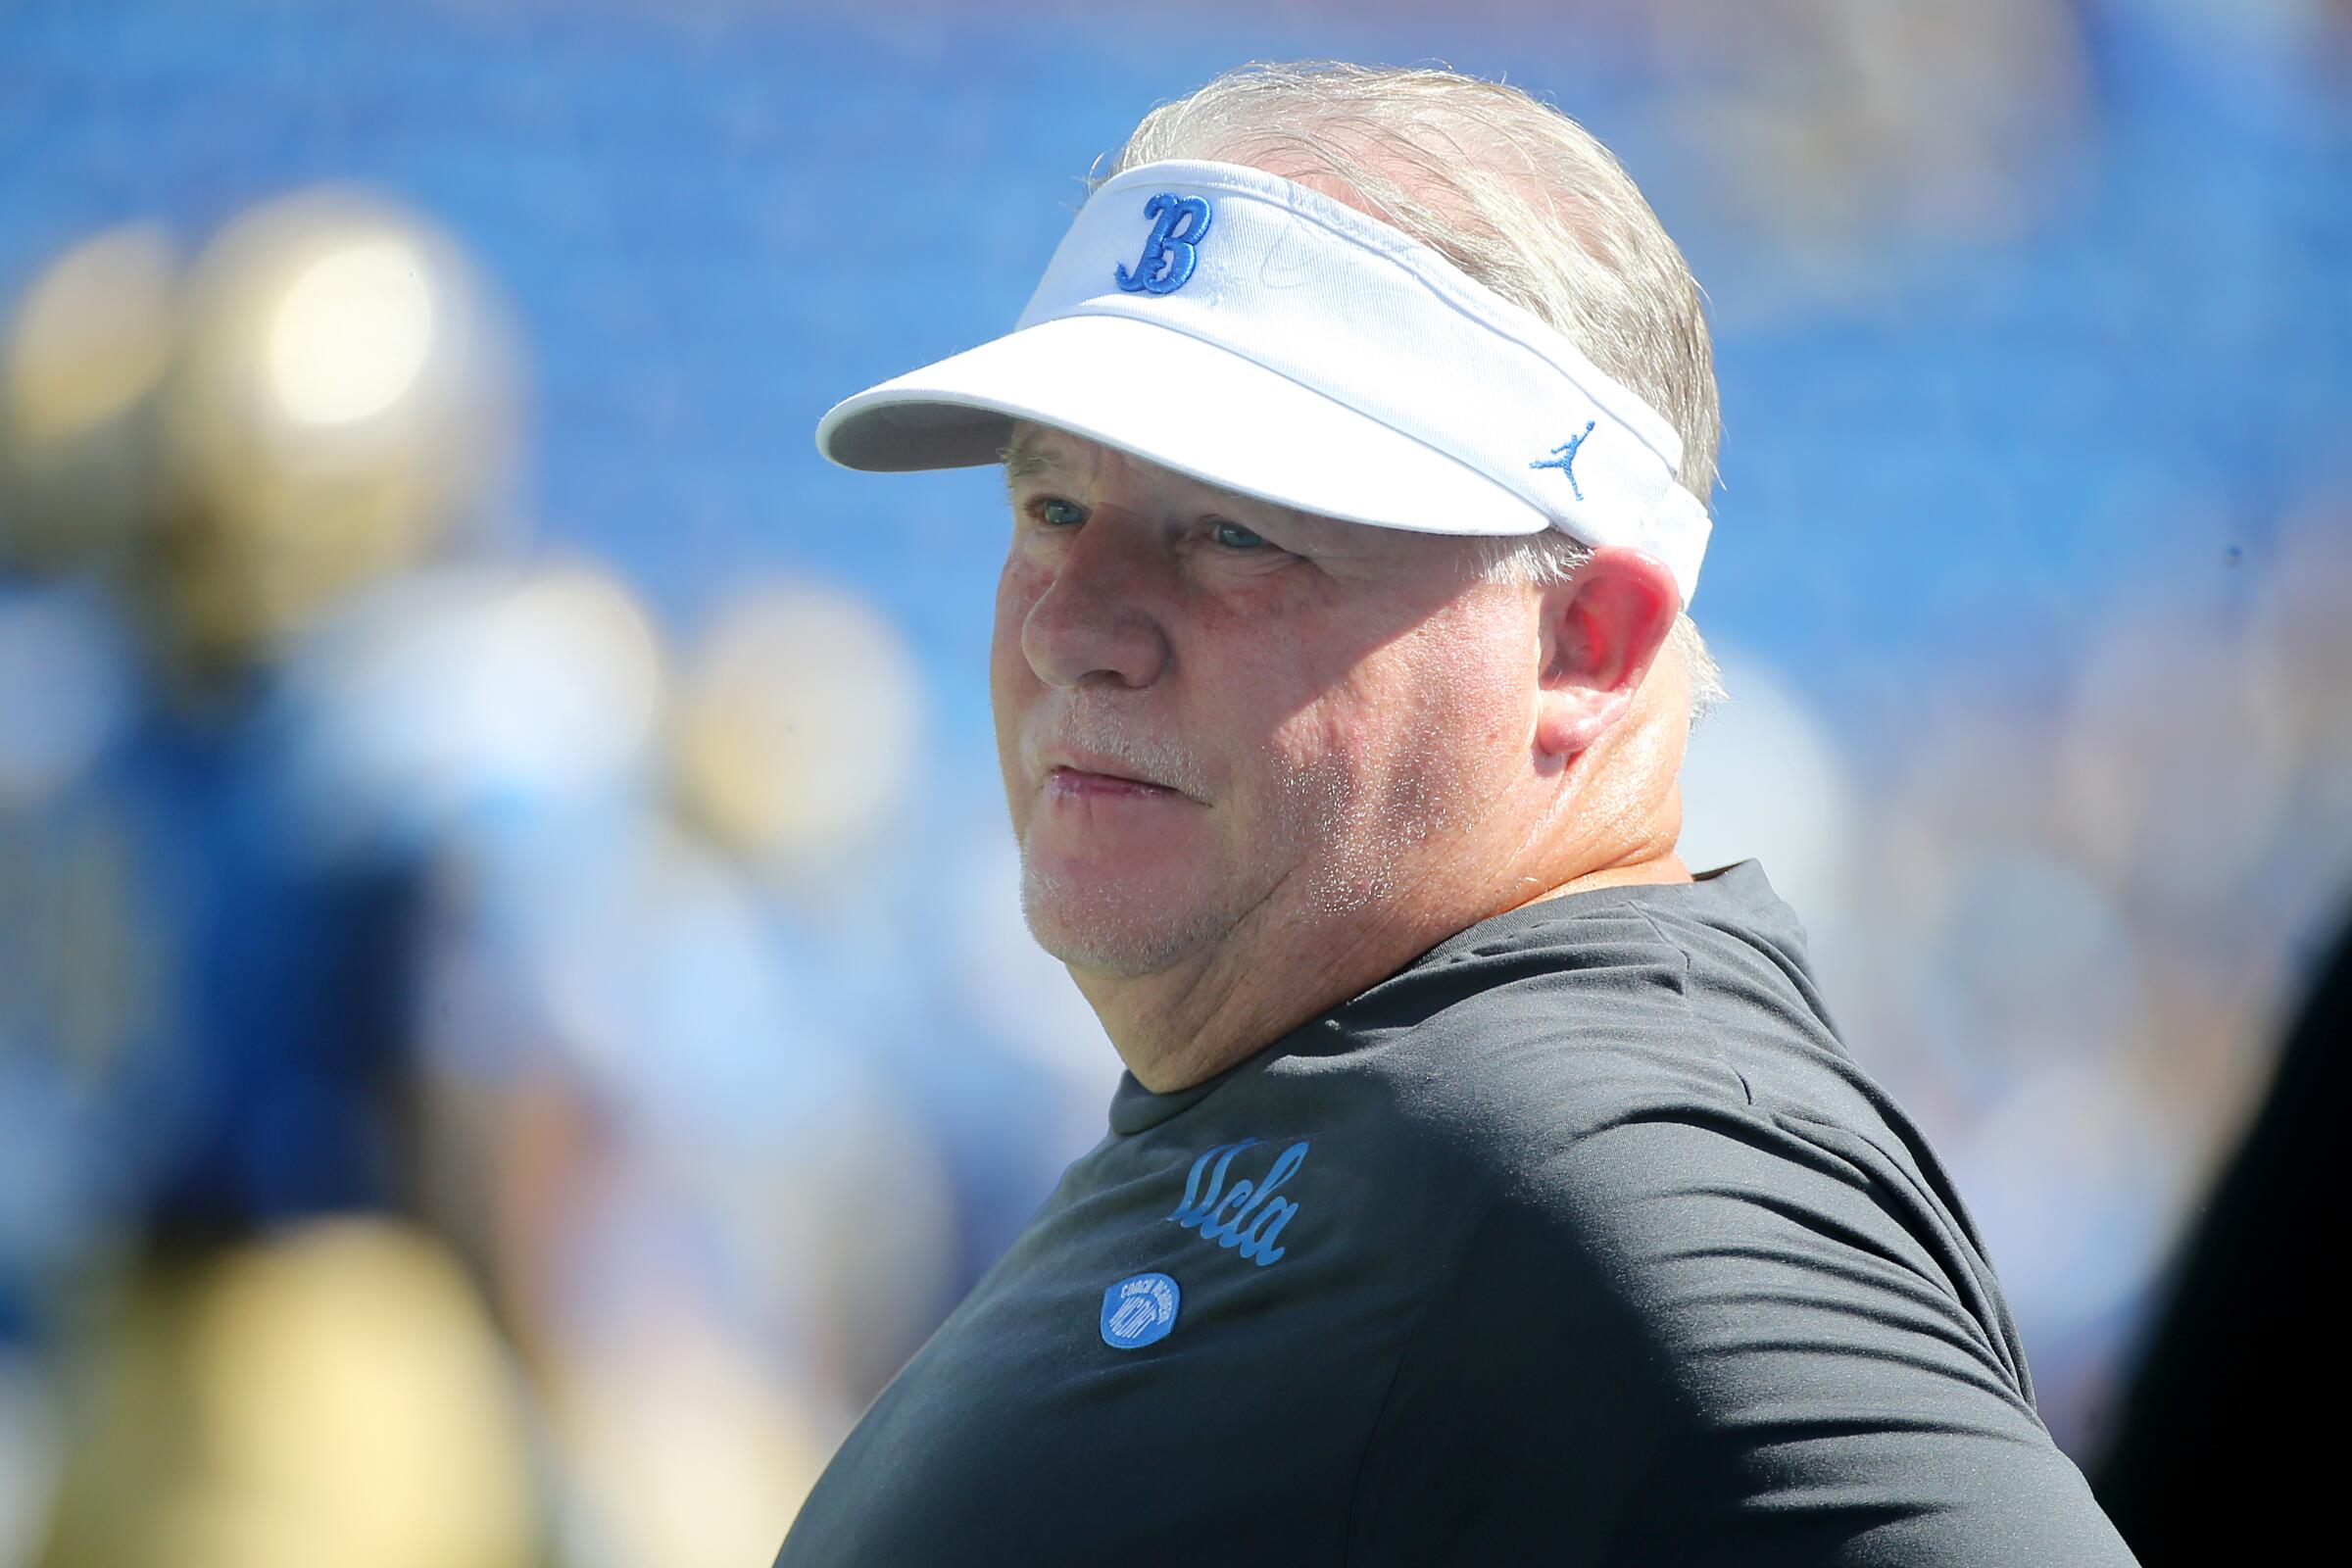 UCLA coach Chip Kelly watches his team warm up